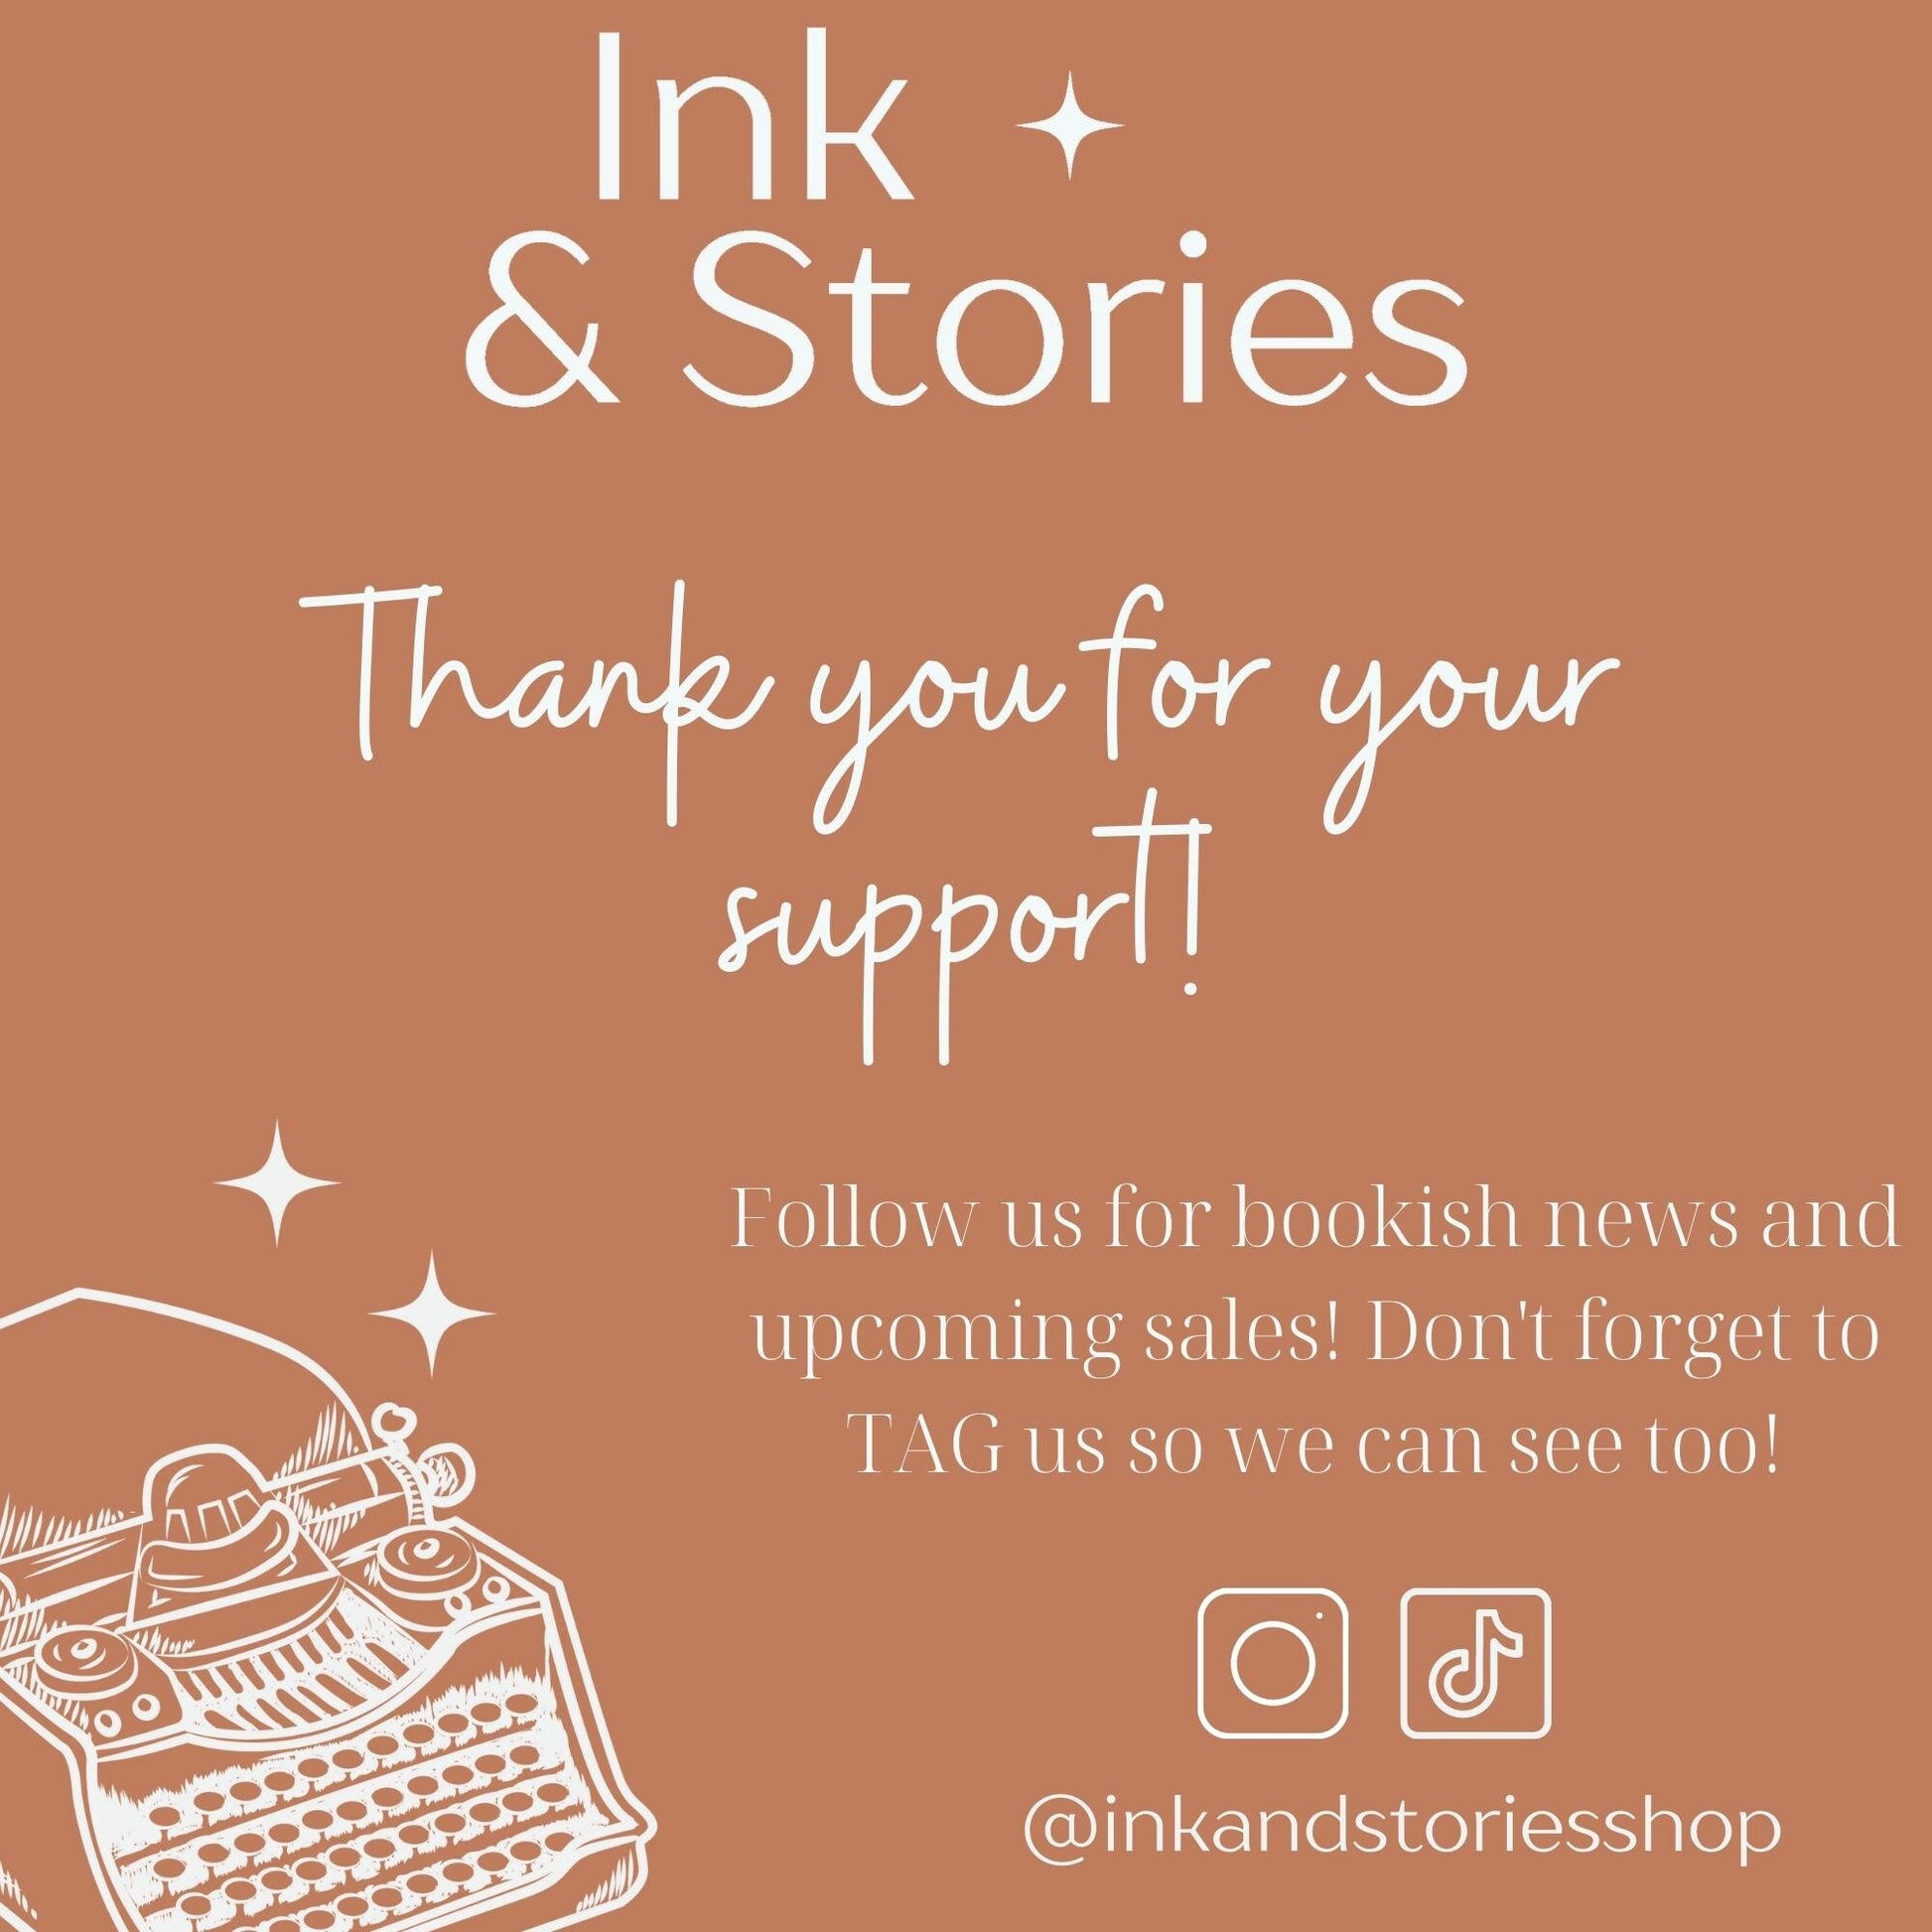 Ink and stories social media thank you card